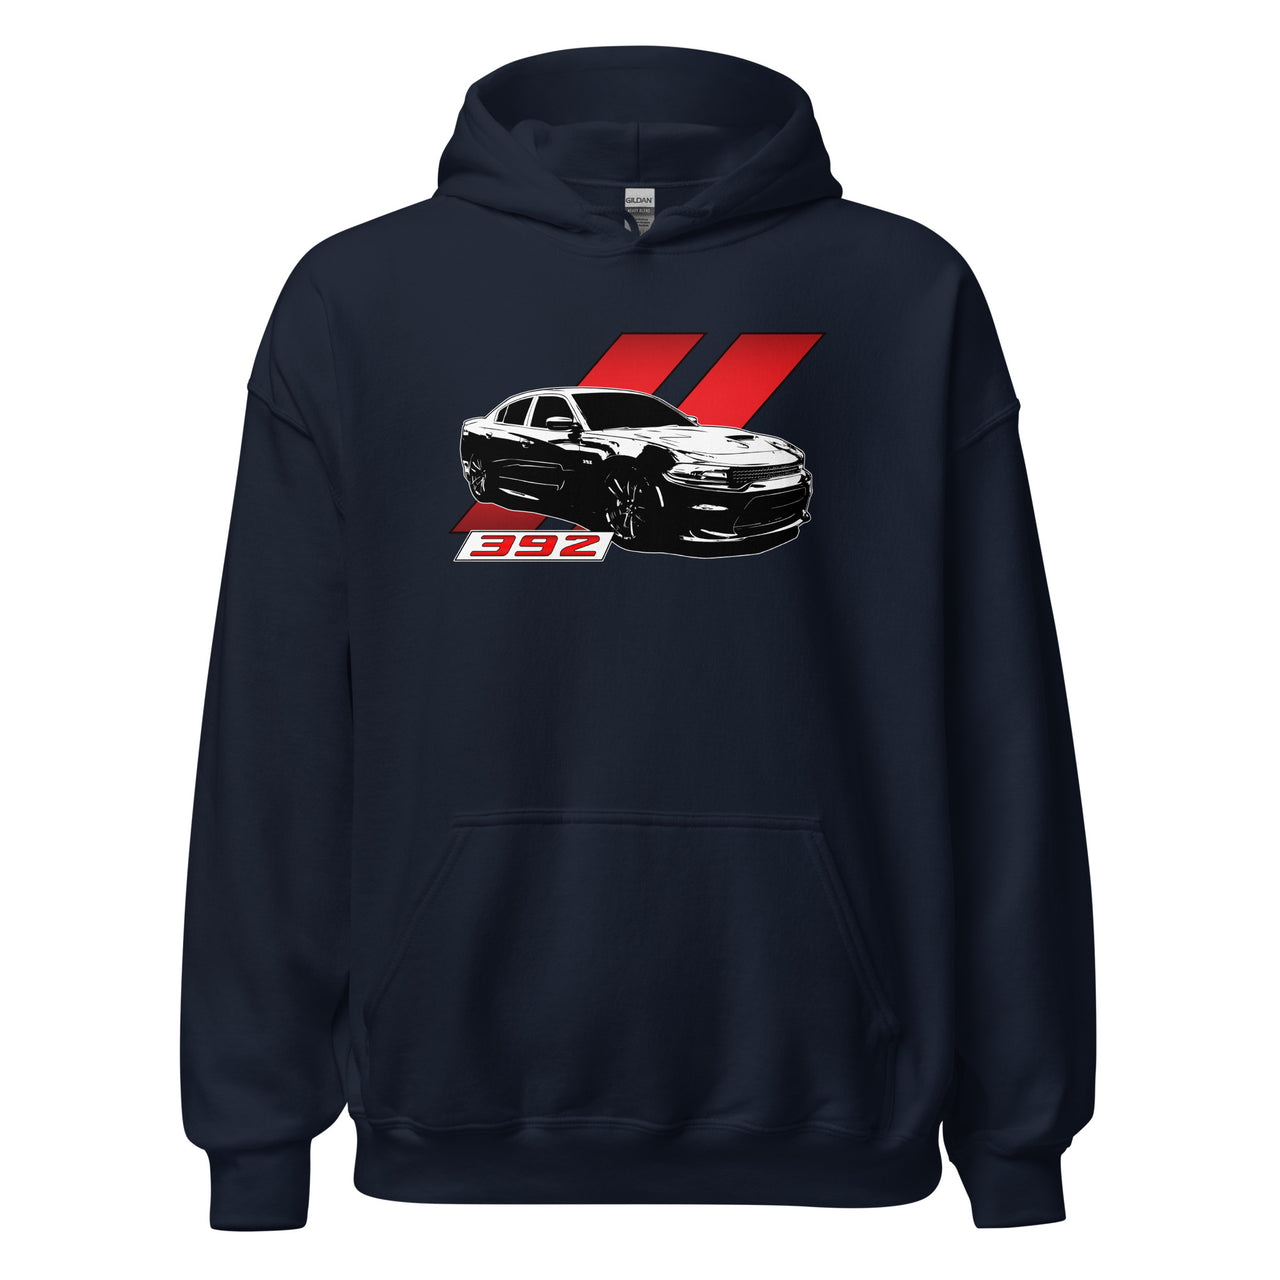 Charger 392 Hoodie in navy